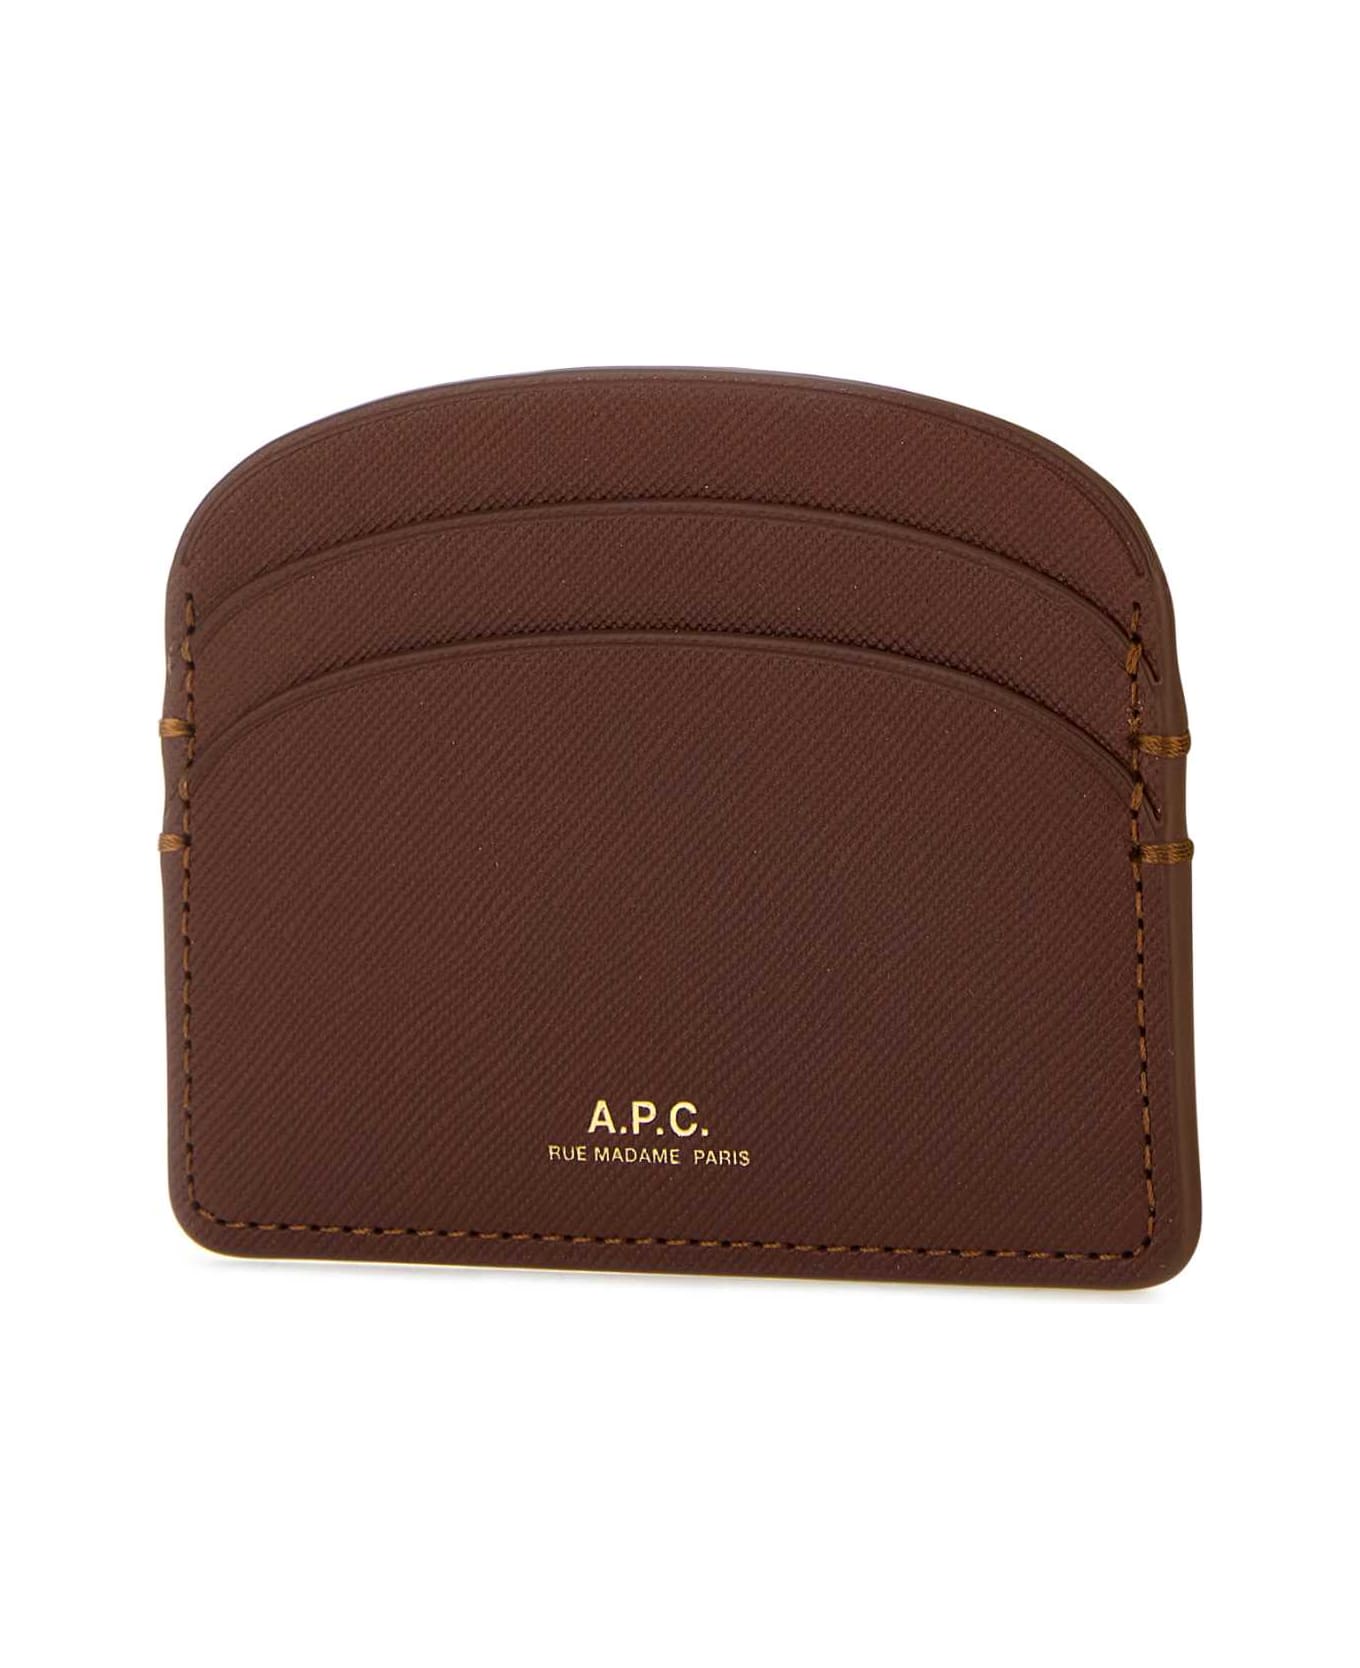 A.P.C. Brown Leather Demi-lune Card Holder - NOISETTE